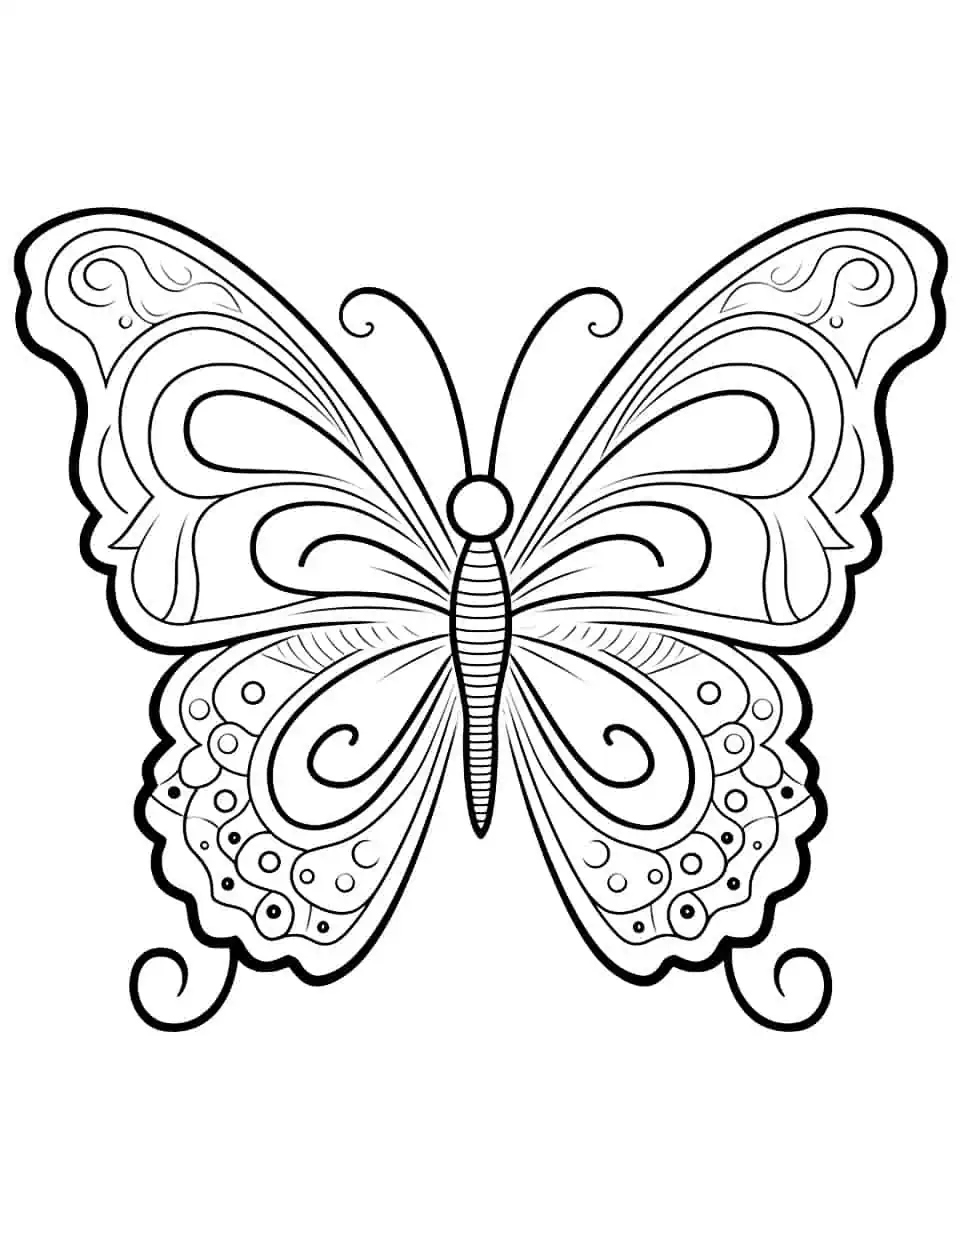 Imaginative Inspiration Butterfly Coloring Page - A coloring page featuring a butterfly with imaginative patterns and vibrant colors.